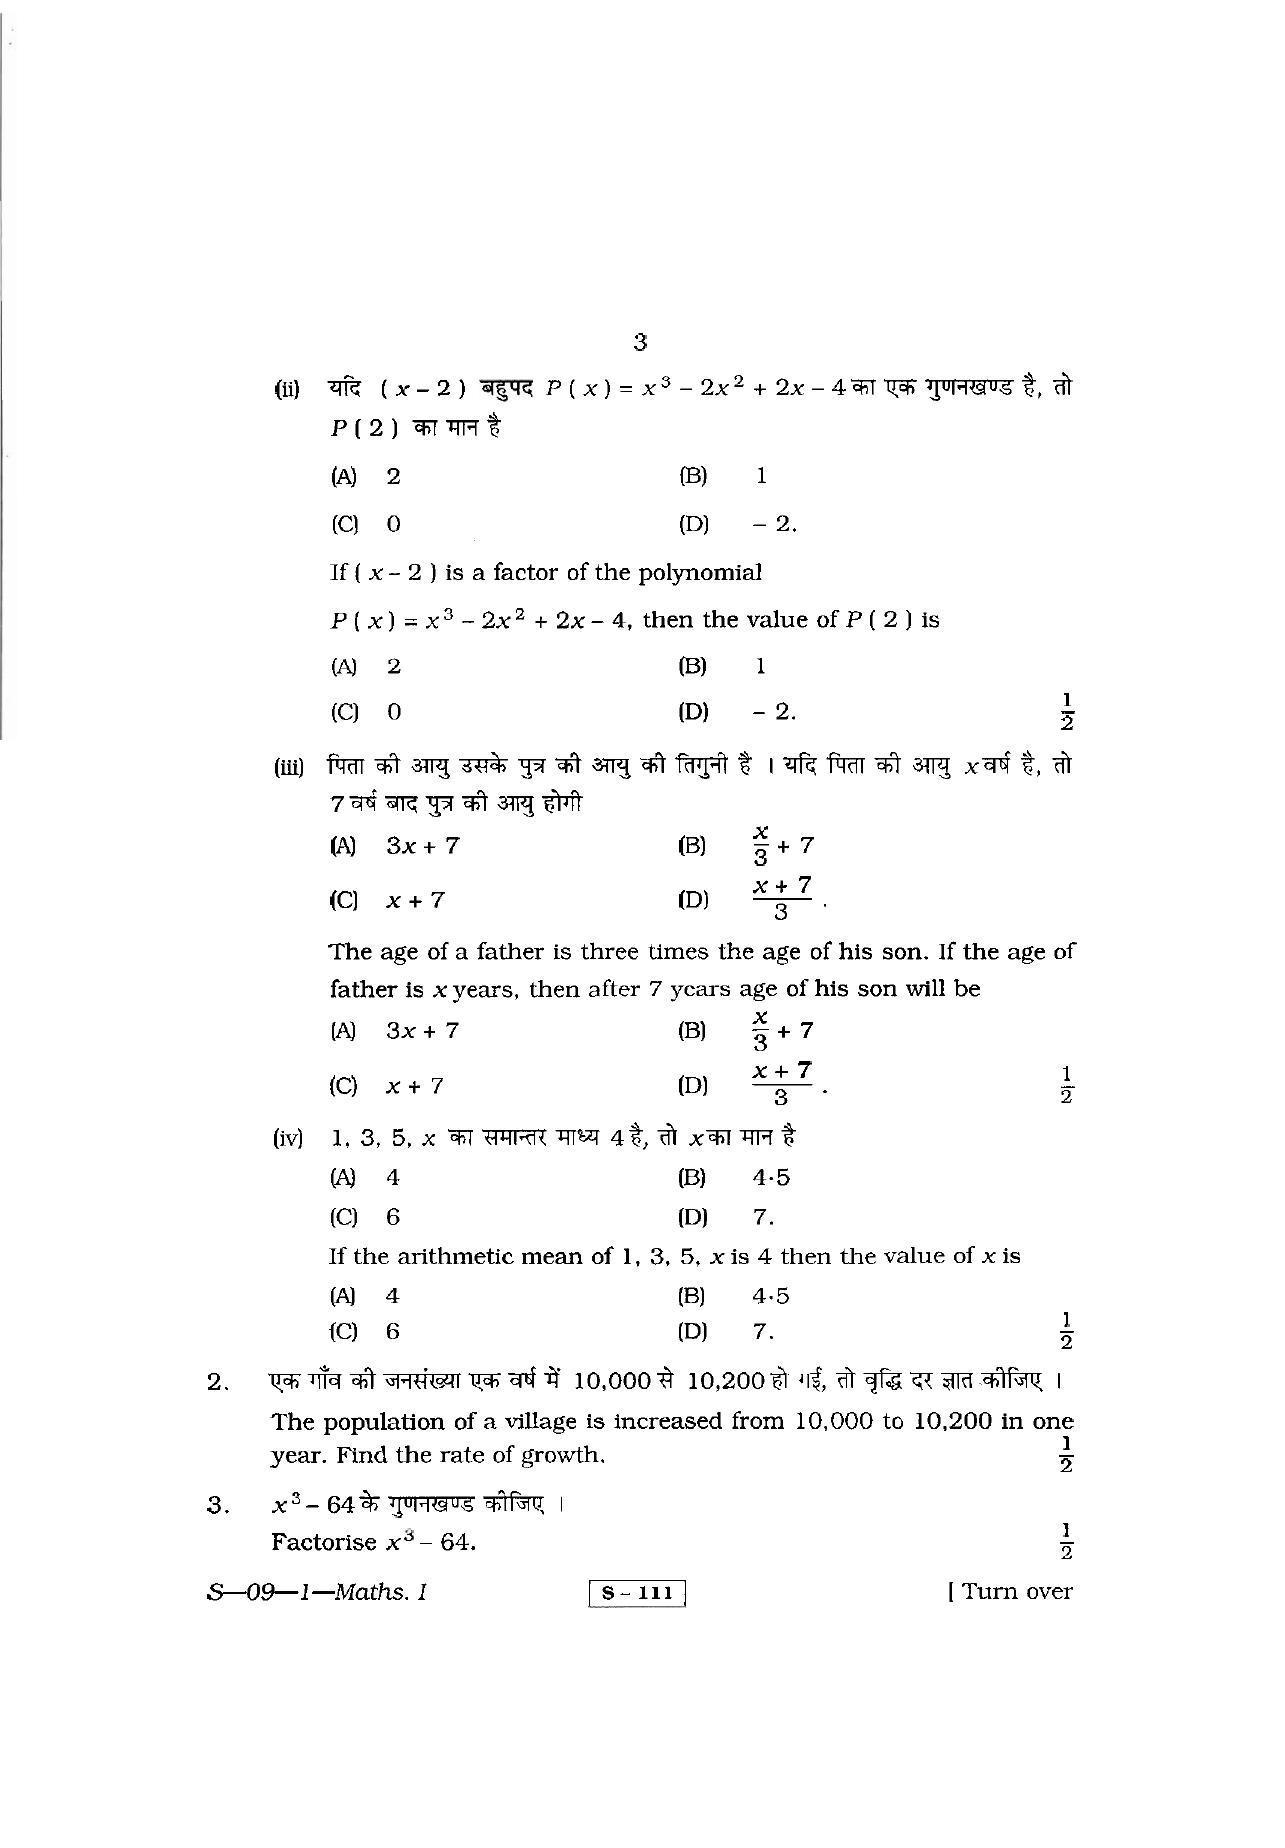 RBSE Class 10 Mathematics  – I 2011 Question Paper - Page 3